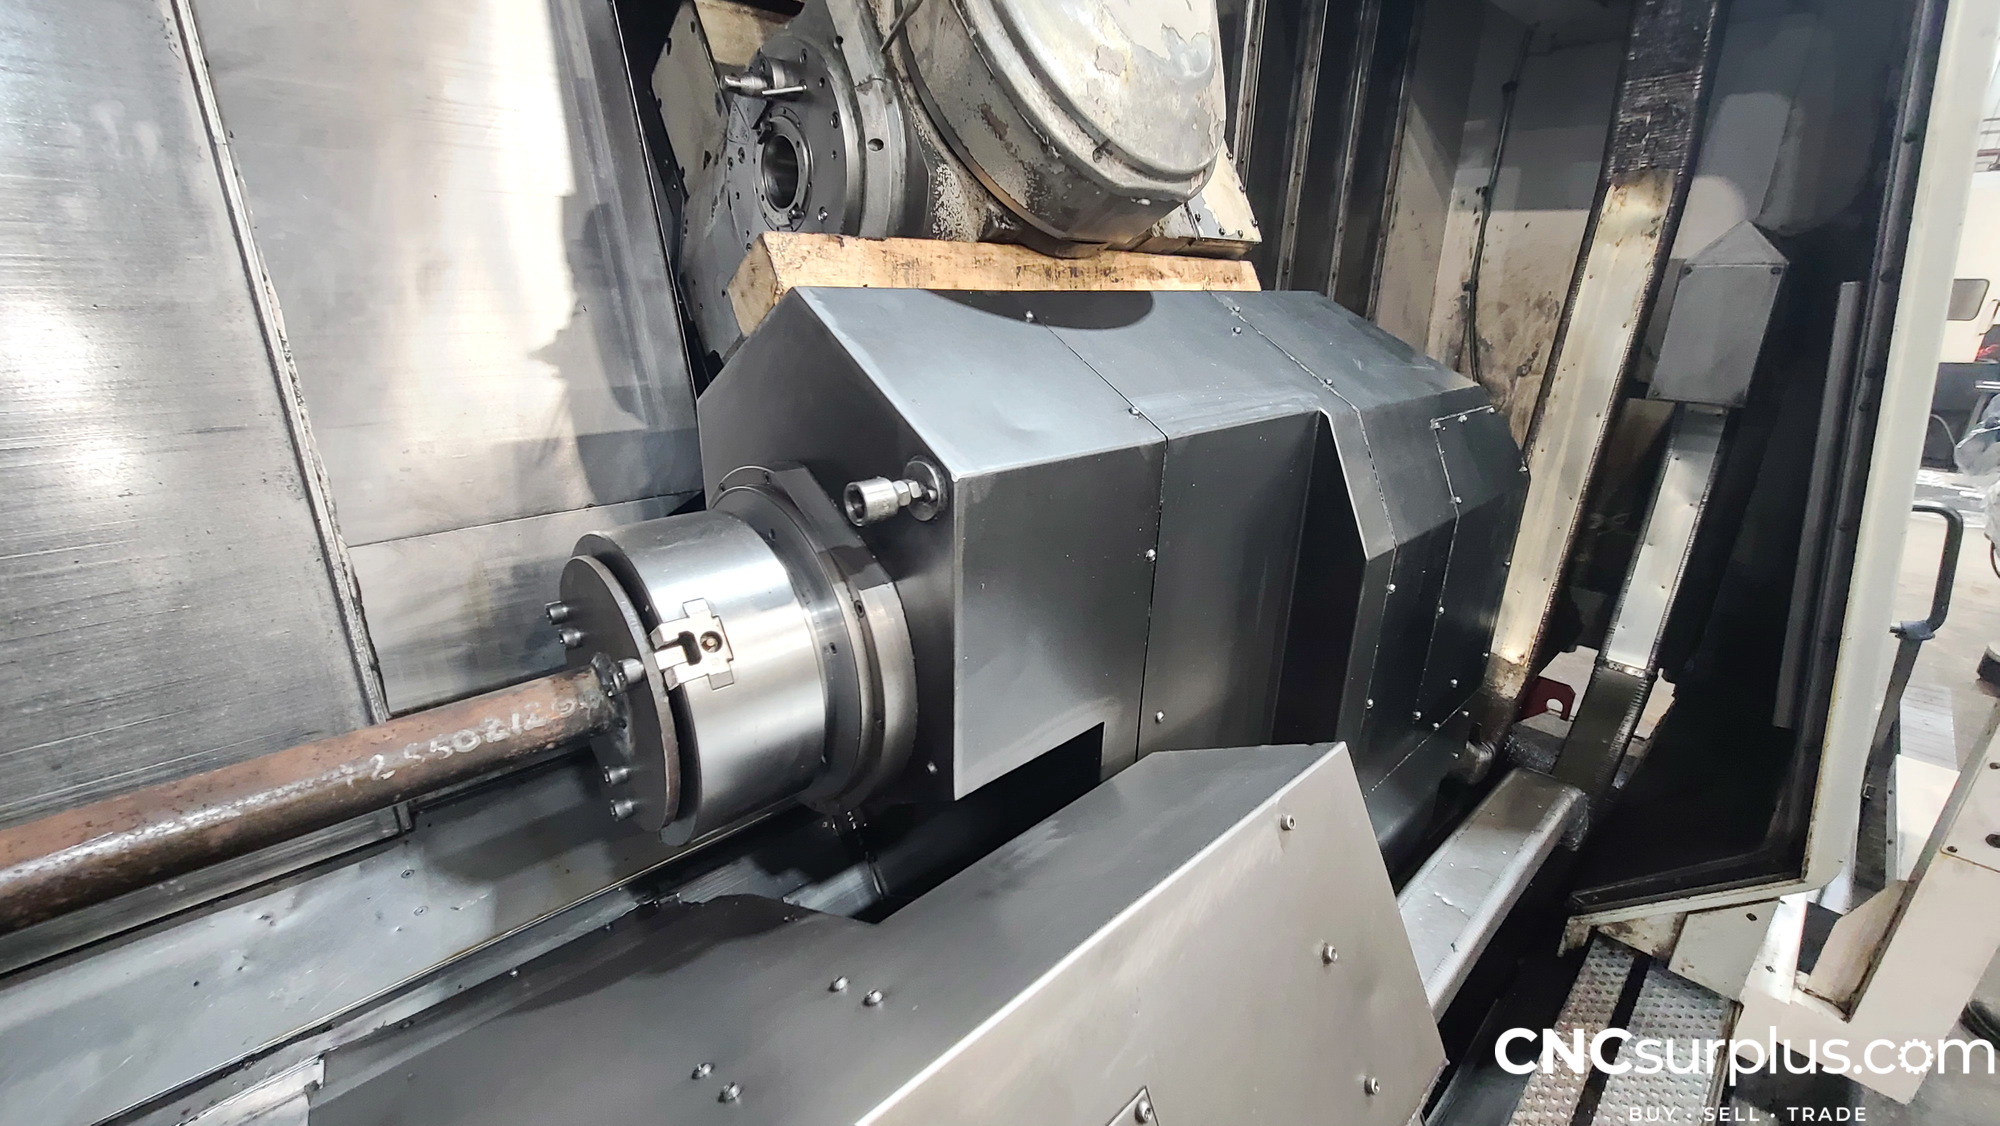 2004 OKUMA MACTURN 550-W 2S 5-Axis or More CNC Lathes | CNCsurplus, A Div. of Comtex Leasing Corp.